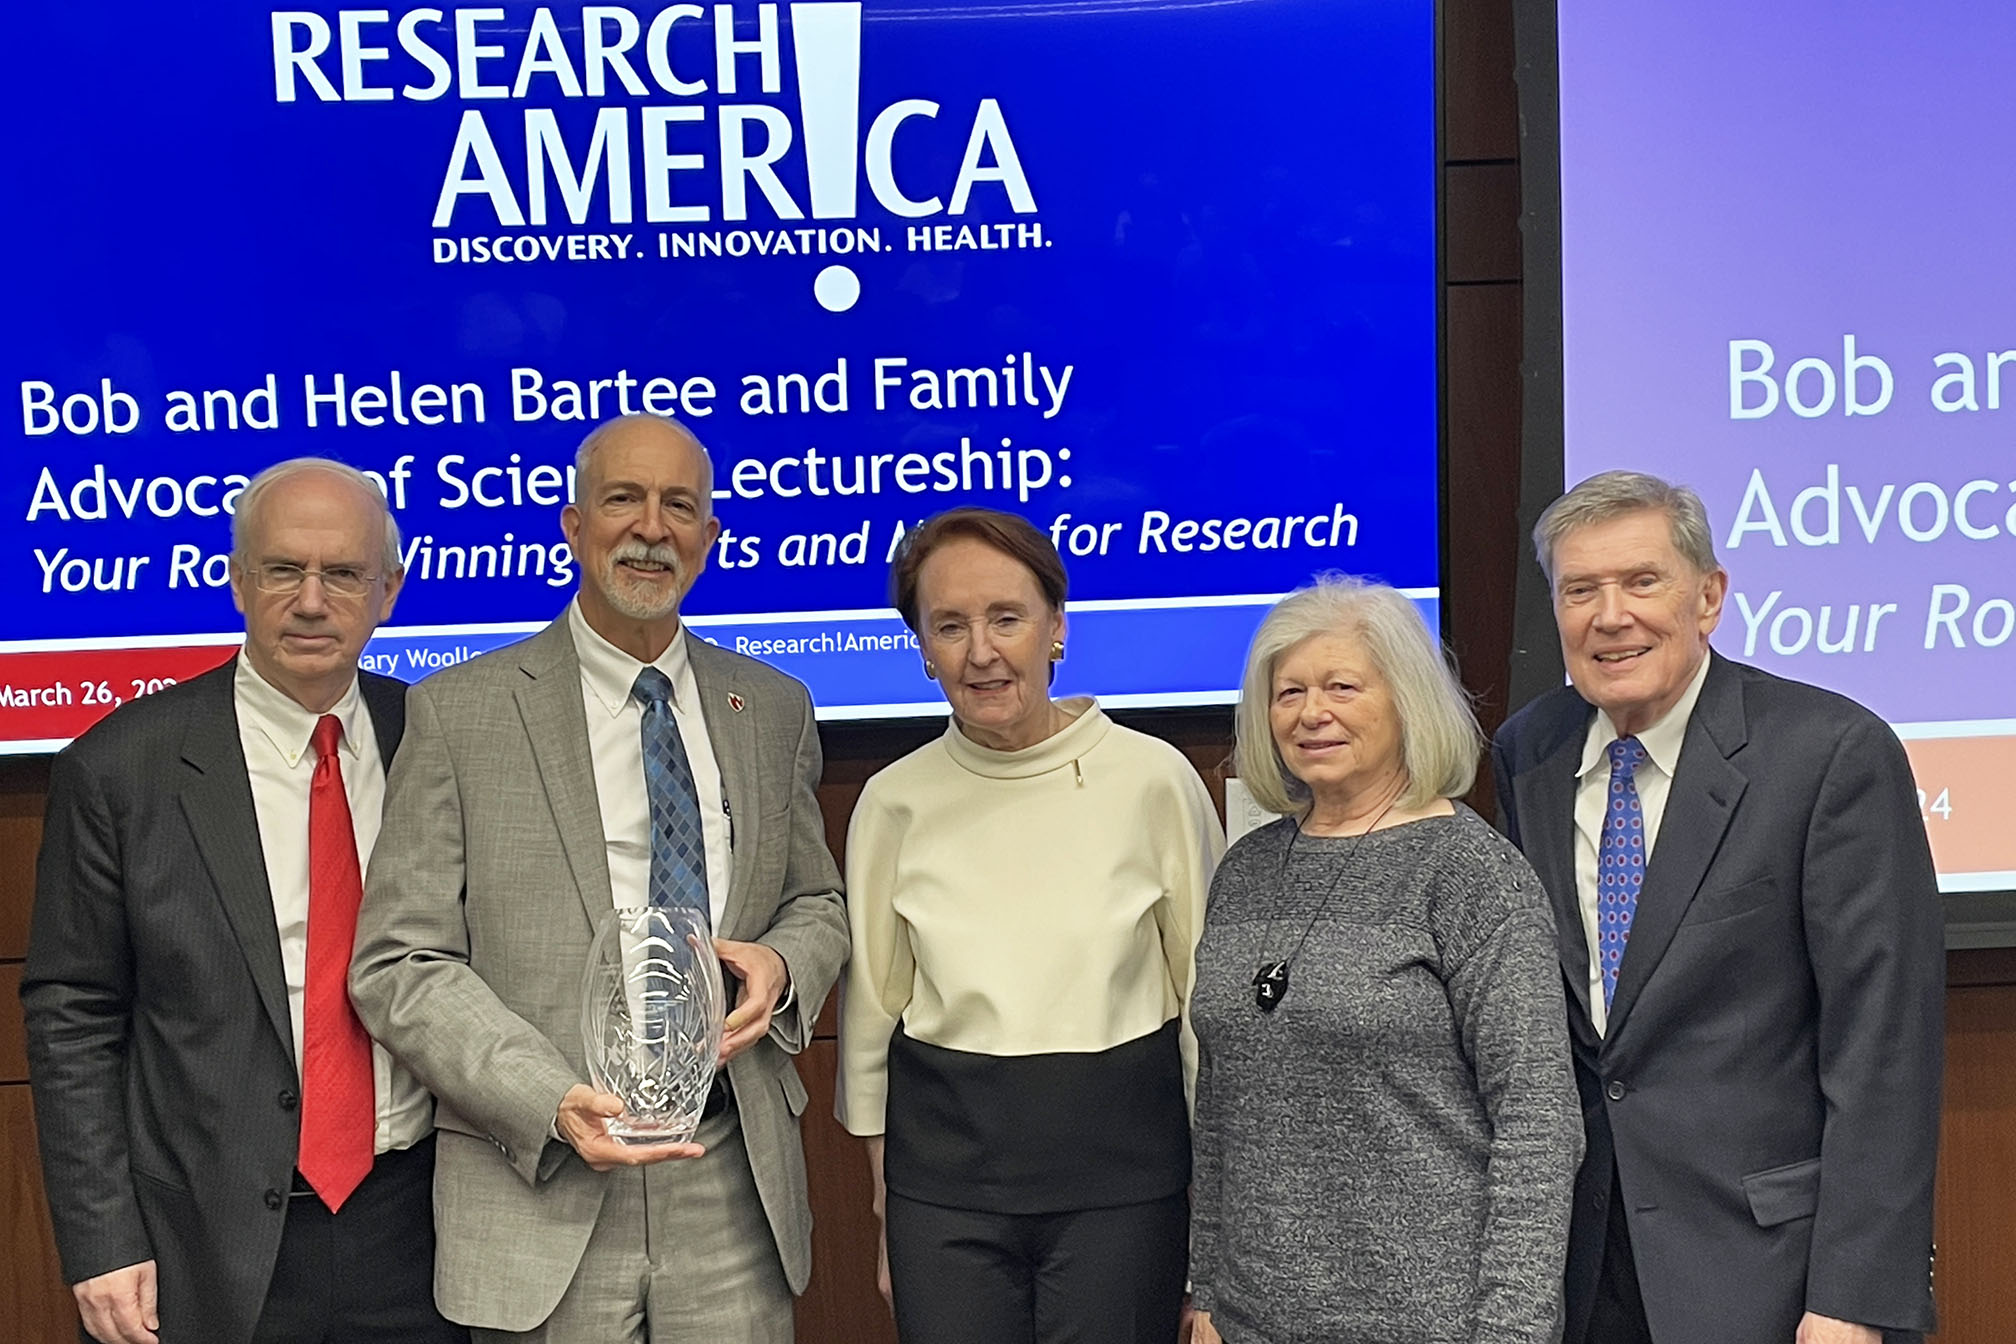 From left&comma; UNMC Chancellor Jeffrey P&period; Gold&comma; MD&comma; Mark Rupp&comma; MD&comma; with the Bartee Advocacy of Science Award&comma; Mary Woolley&comma; president and CEO of Research&excl;America&comma; and Helen and Bob Bartee